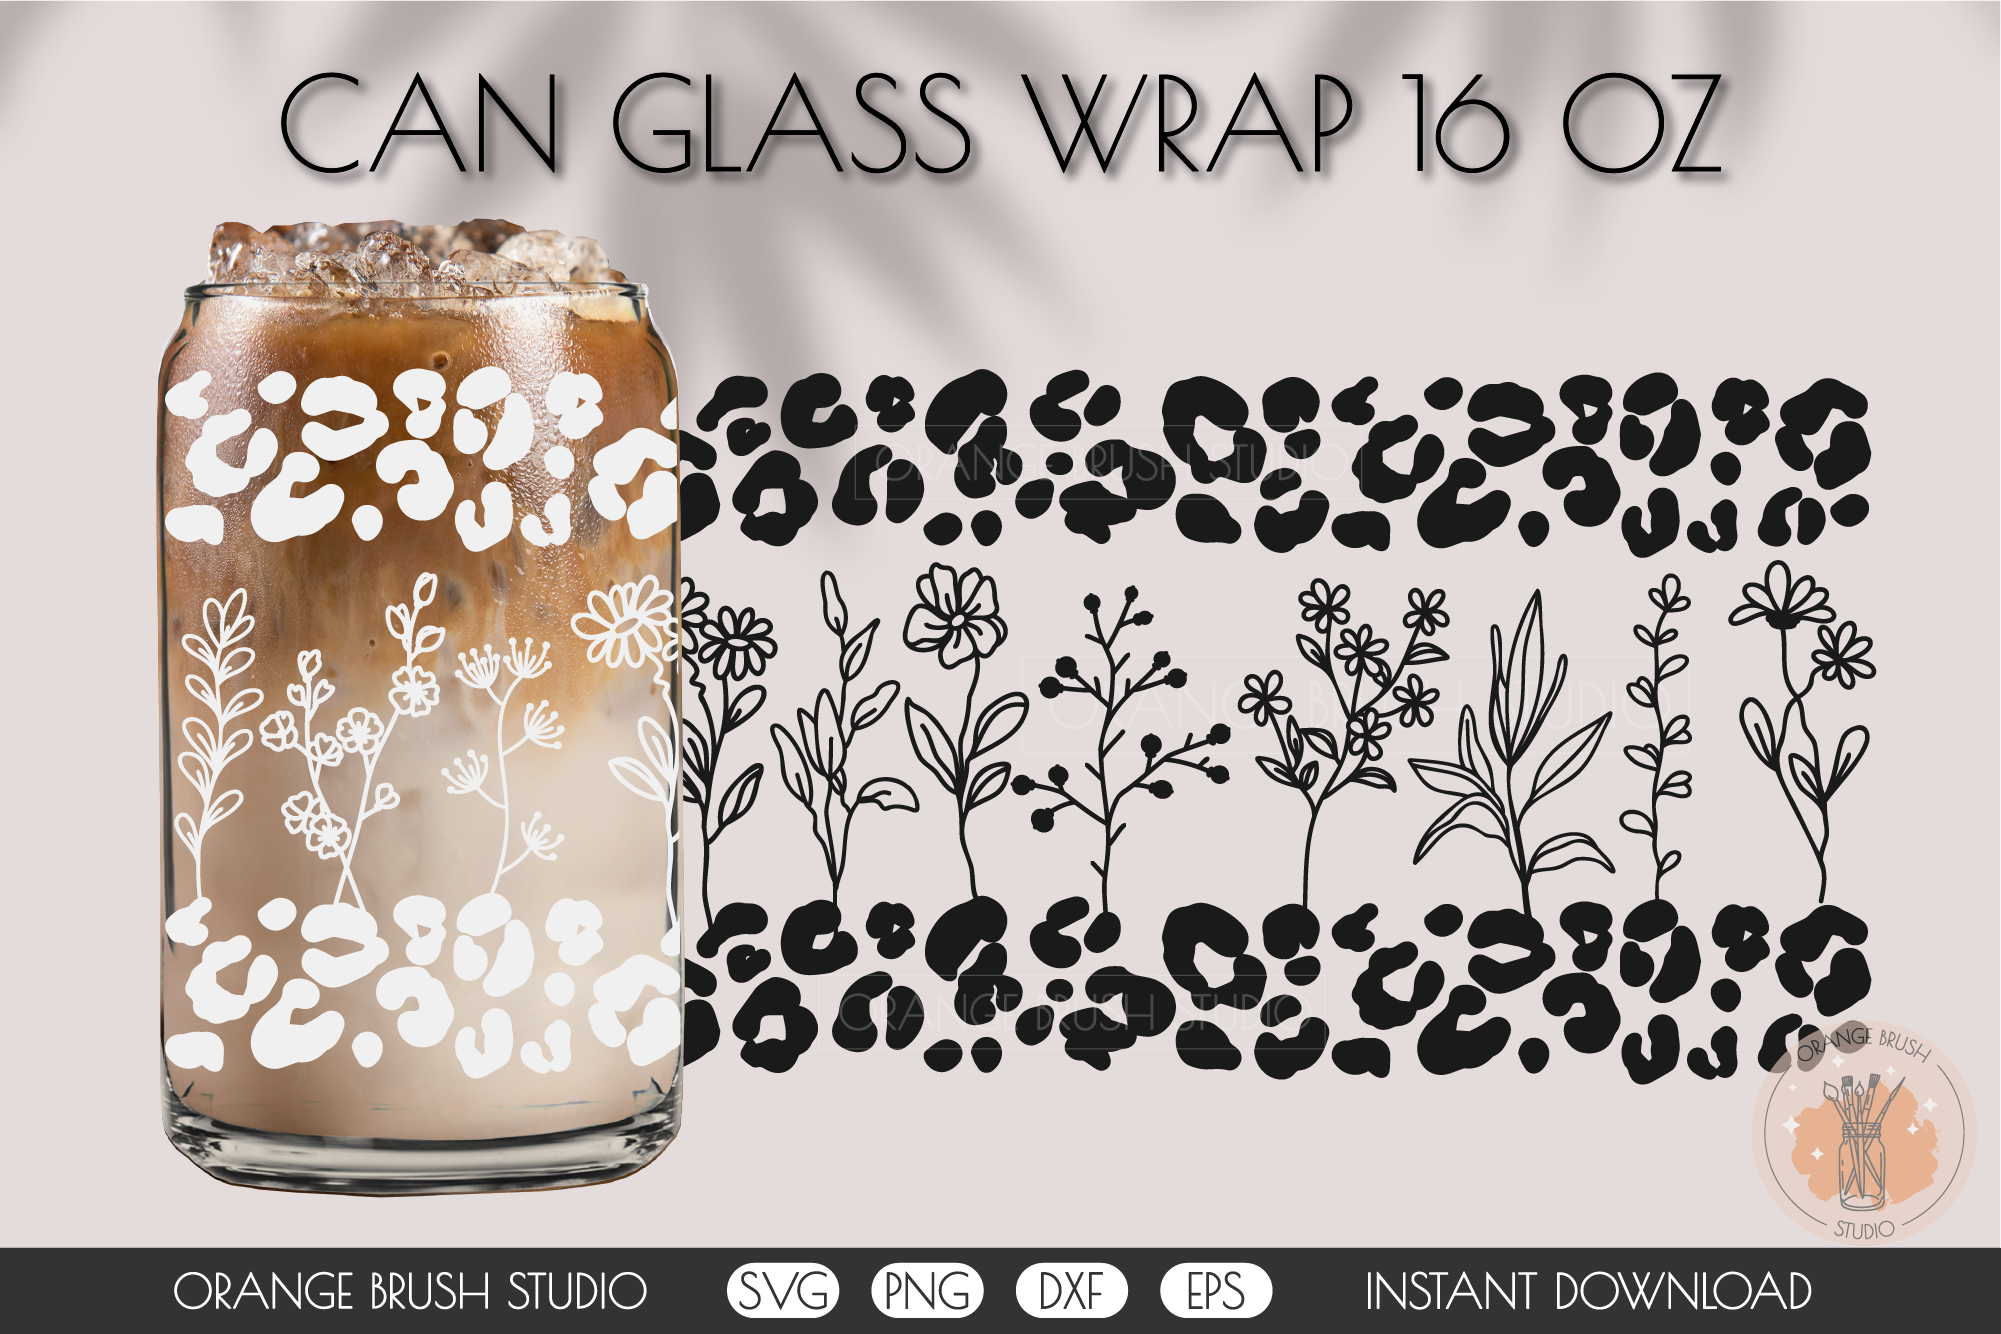 Beer Can Glass Wrap SVG SVGs and Cut Files